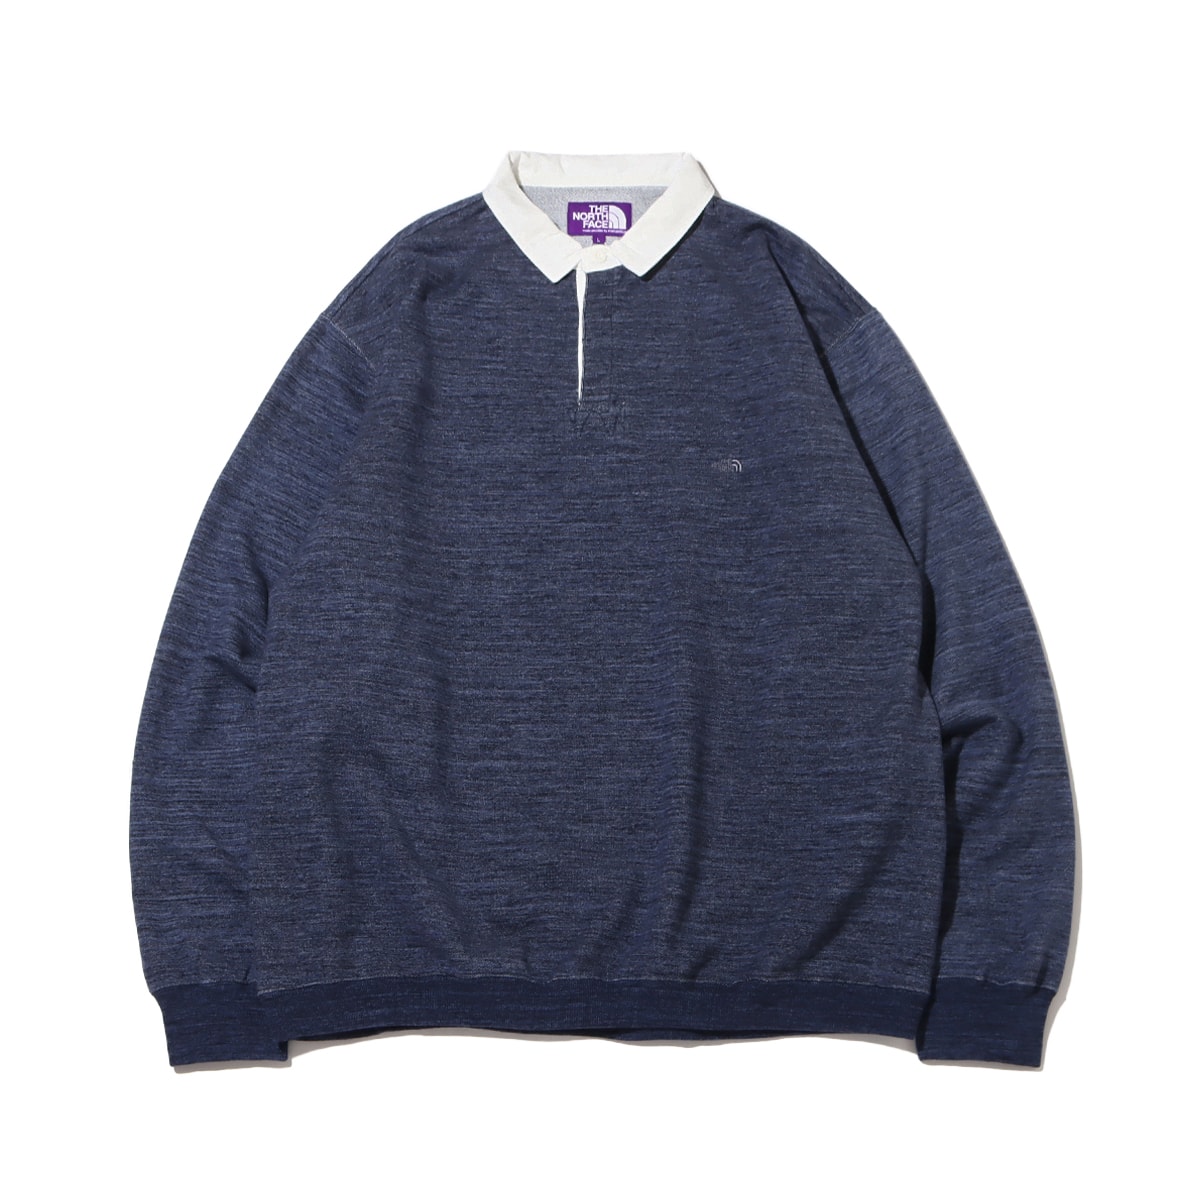 THE NORTH FACE PURPLE LABEL Rugby Sweatshirt Navy 23SS-I